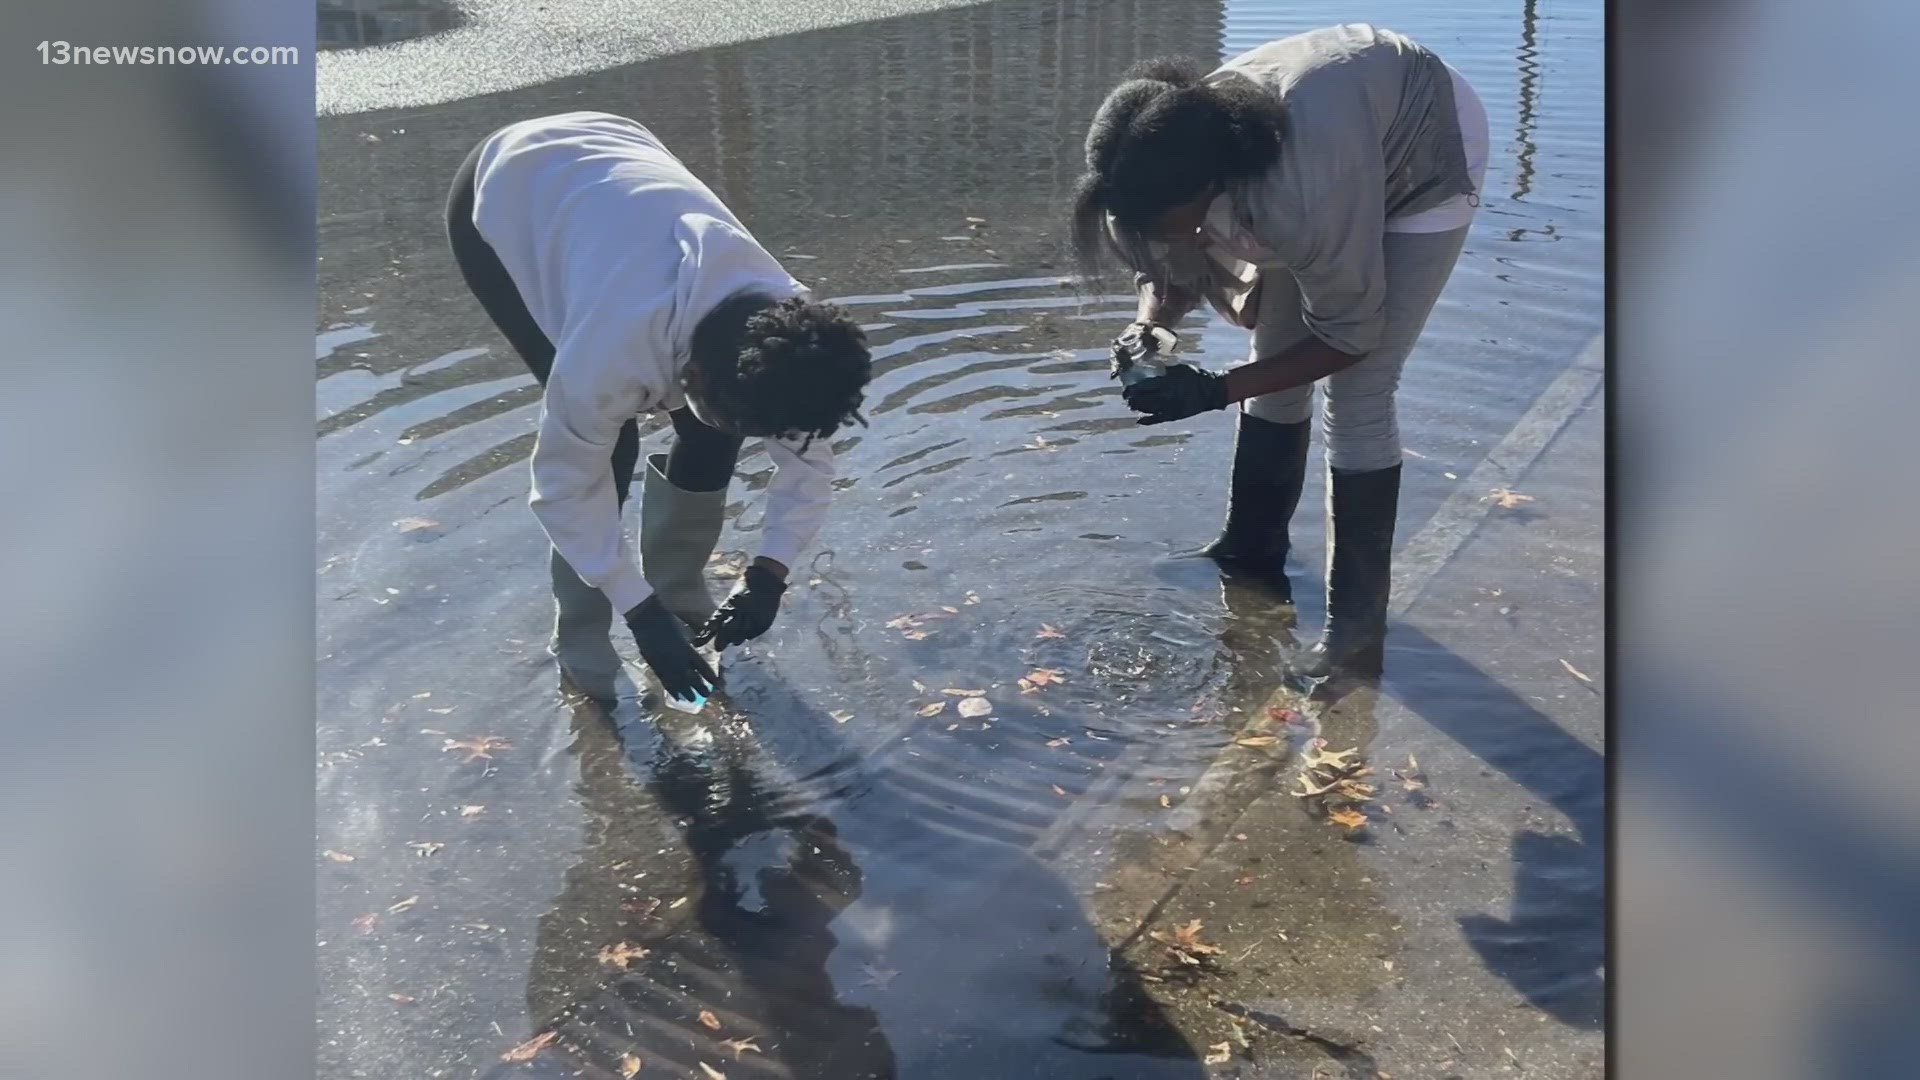 Groups led by Old Dominion University spread through Norfolk and beyond to measure the tide and collect water samples to keep our waterways healthy for years to come